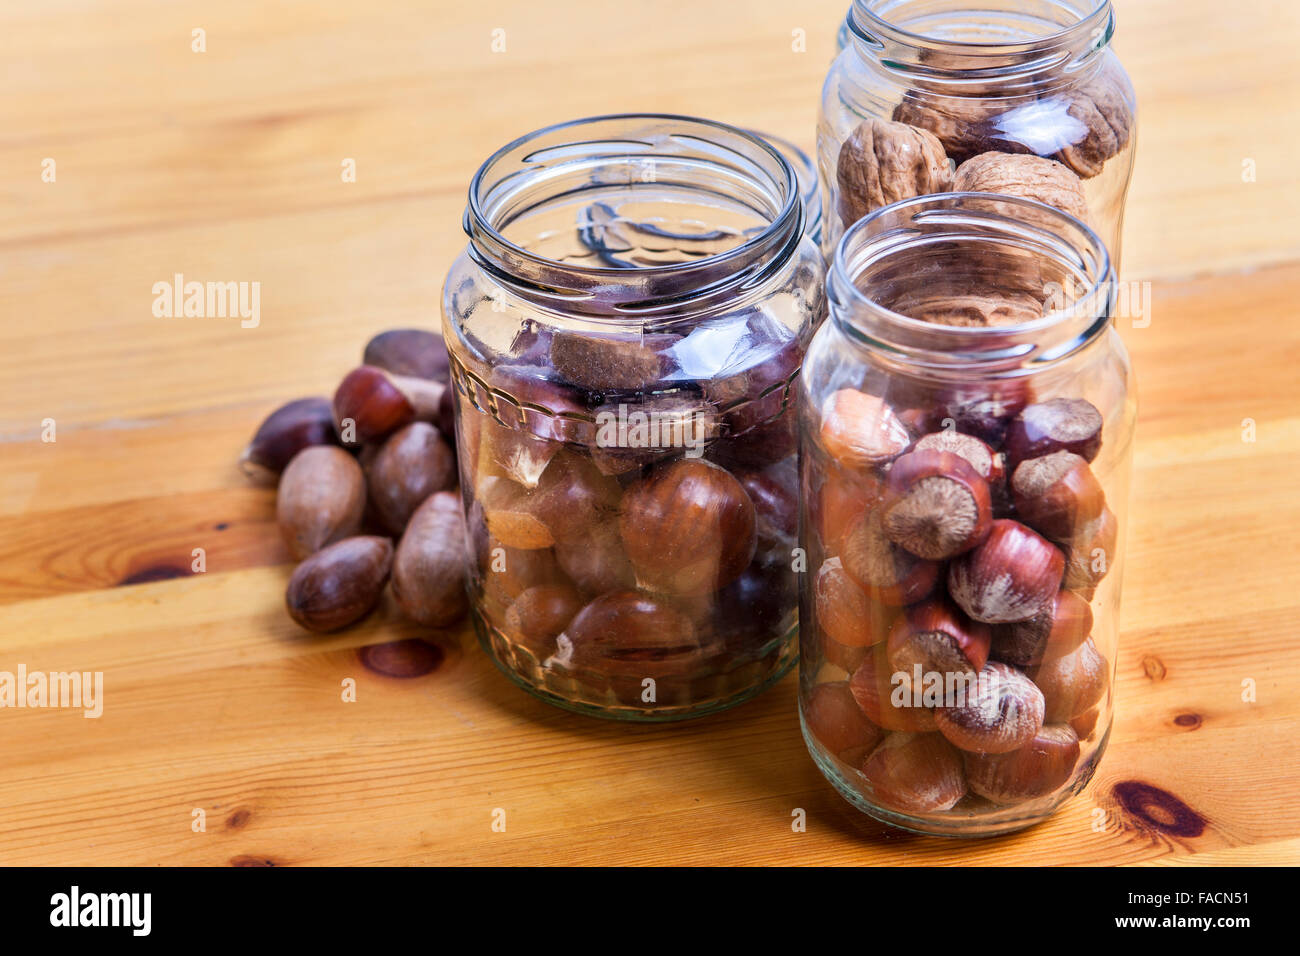 Nuts on glass jars over wooden surface. Isolated over white background Stock Photo